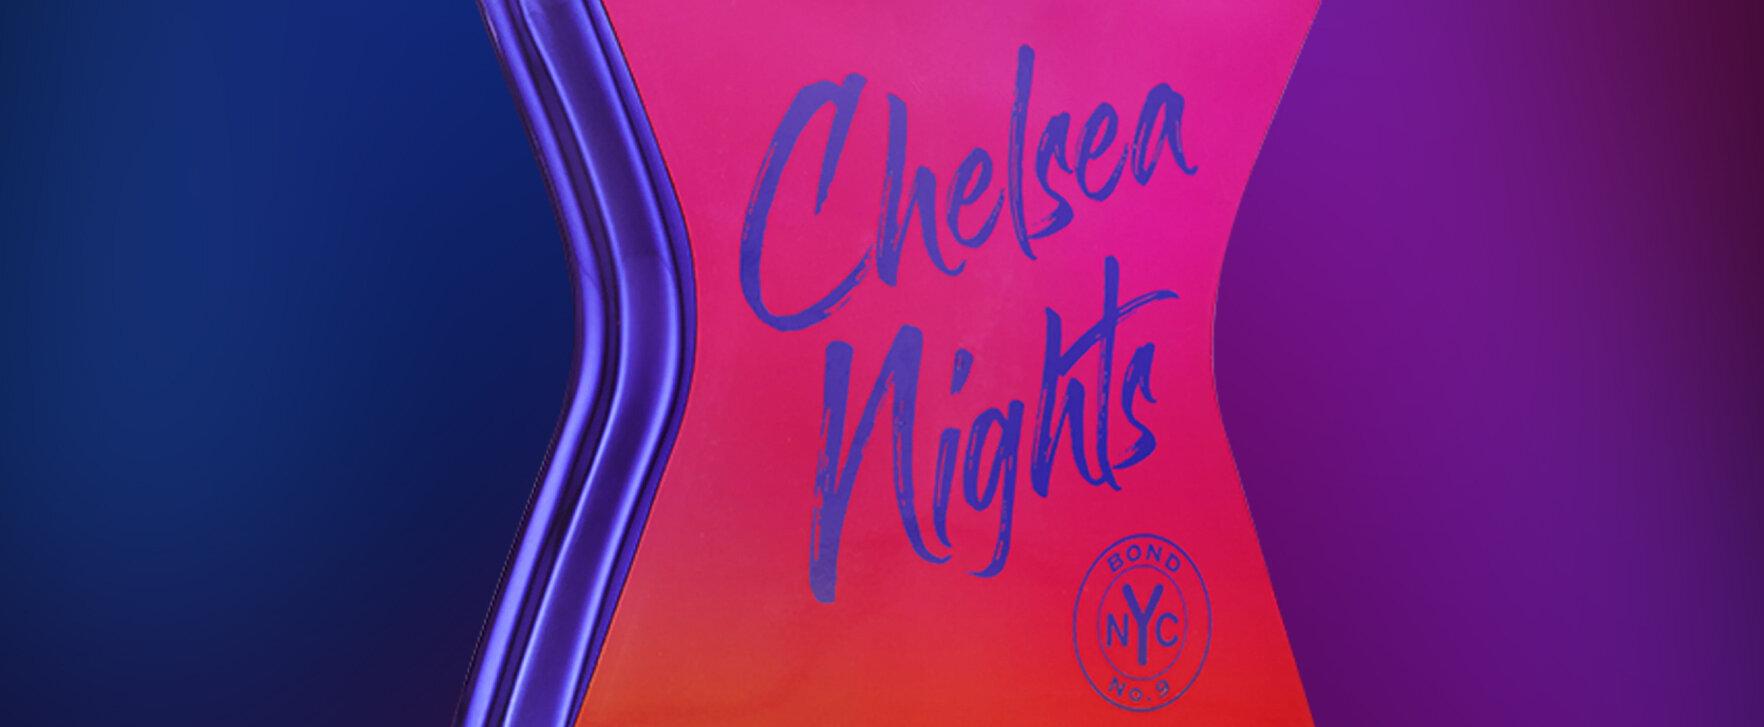 “Chelsea Nights” - New Fragrance by the New York Niche Label Bond No. 9